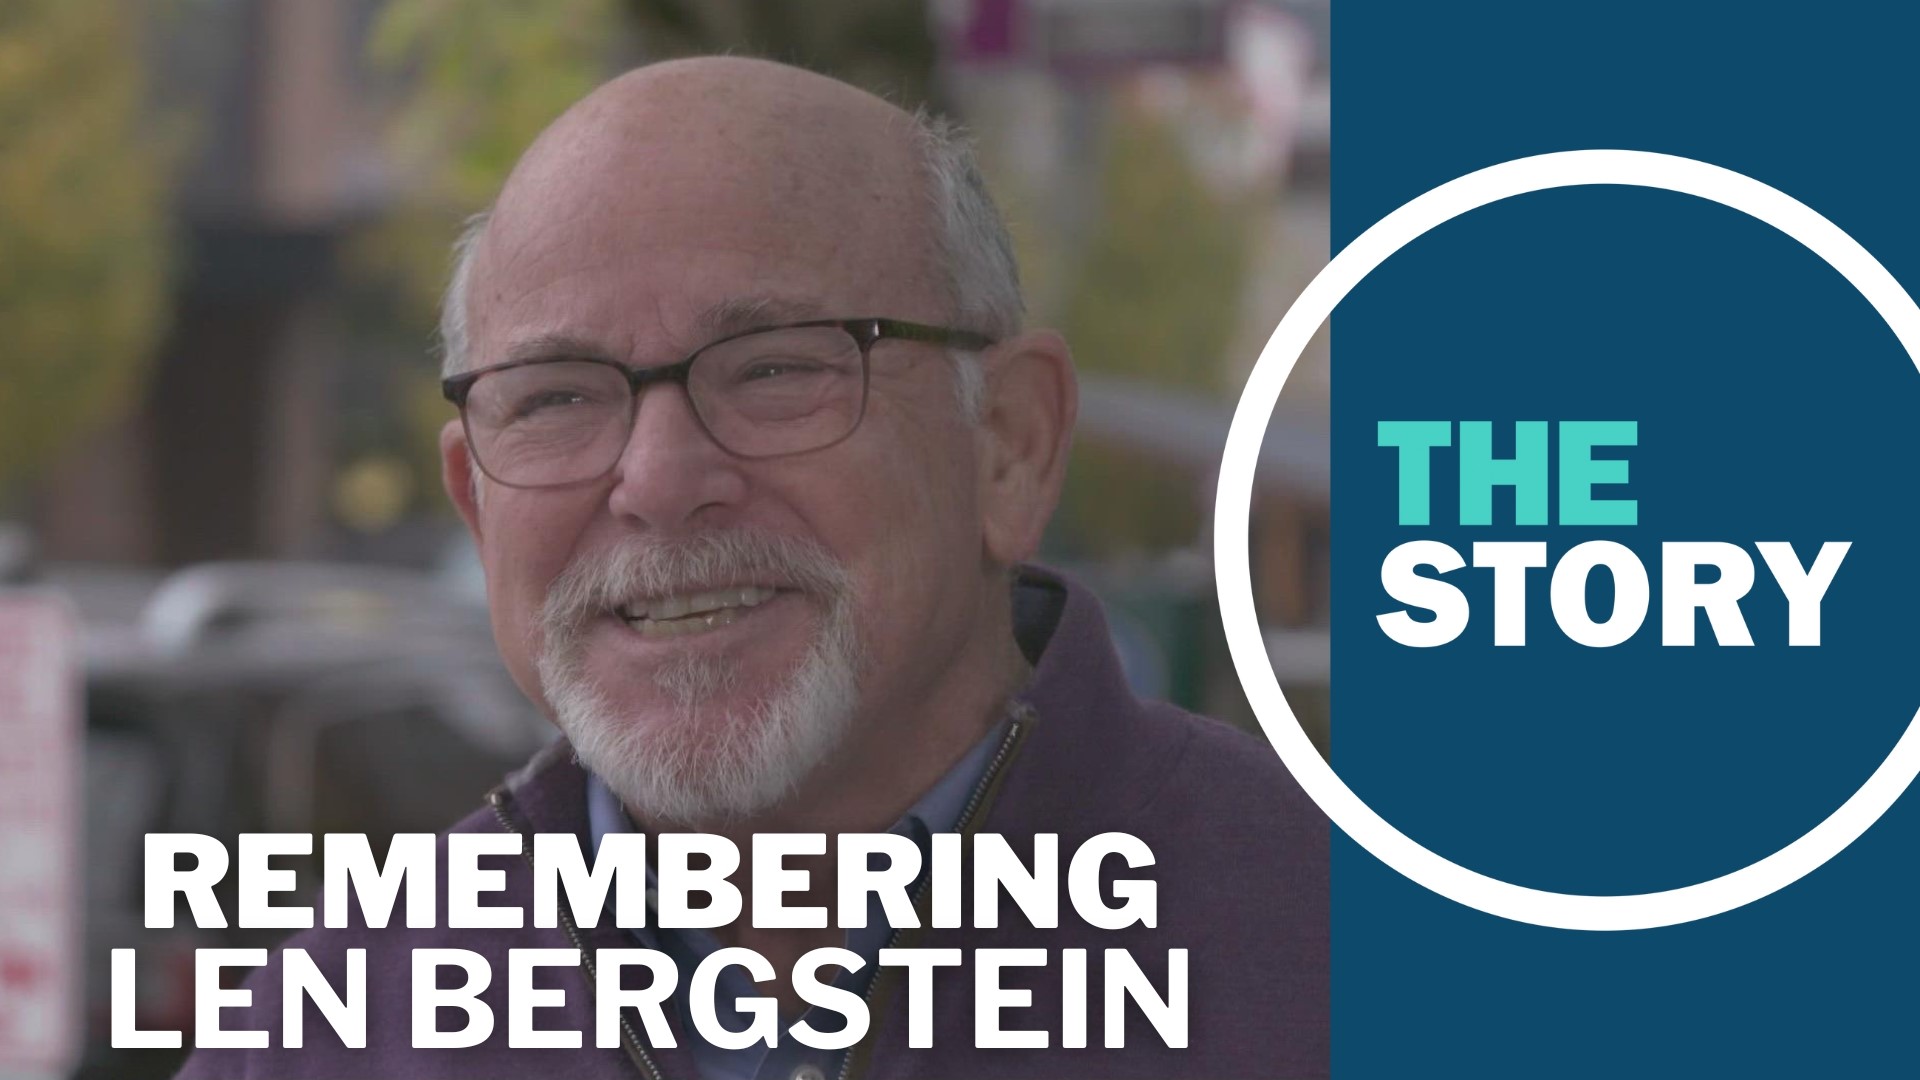 Bergstein was a political analyst for KGW. He died Monday night, according to his family.